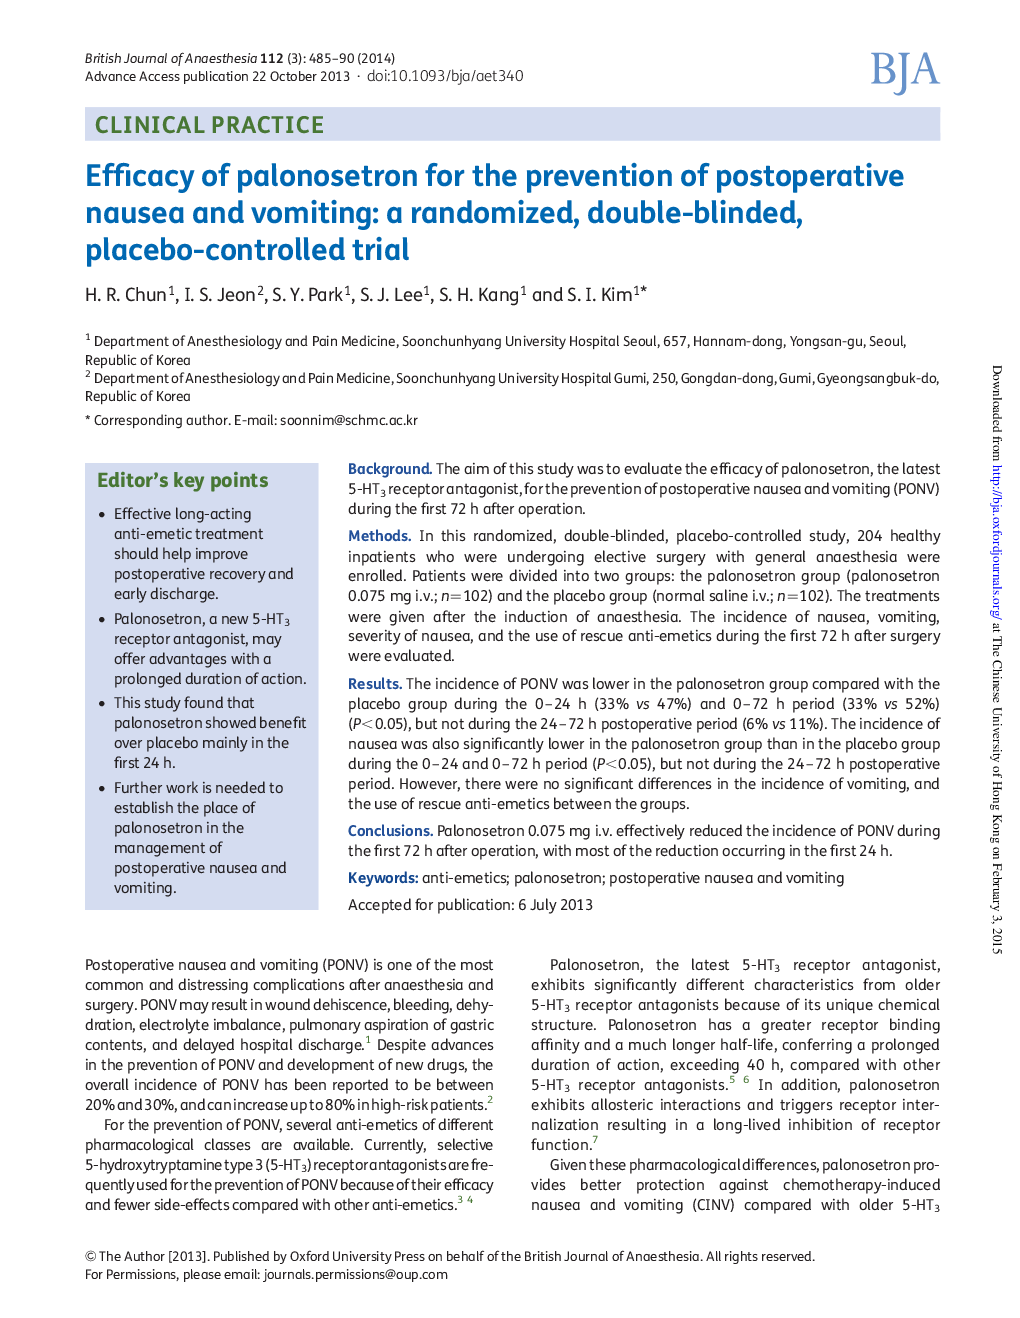 Efficacy of palonosetron for the prevention of postoperative nausea and vomiting: a randomized, double-blinded, placebo-controlled trial